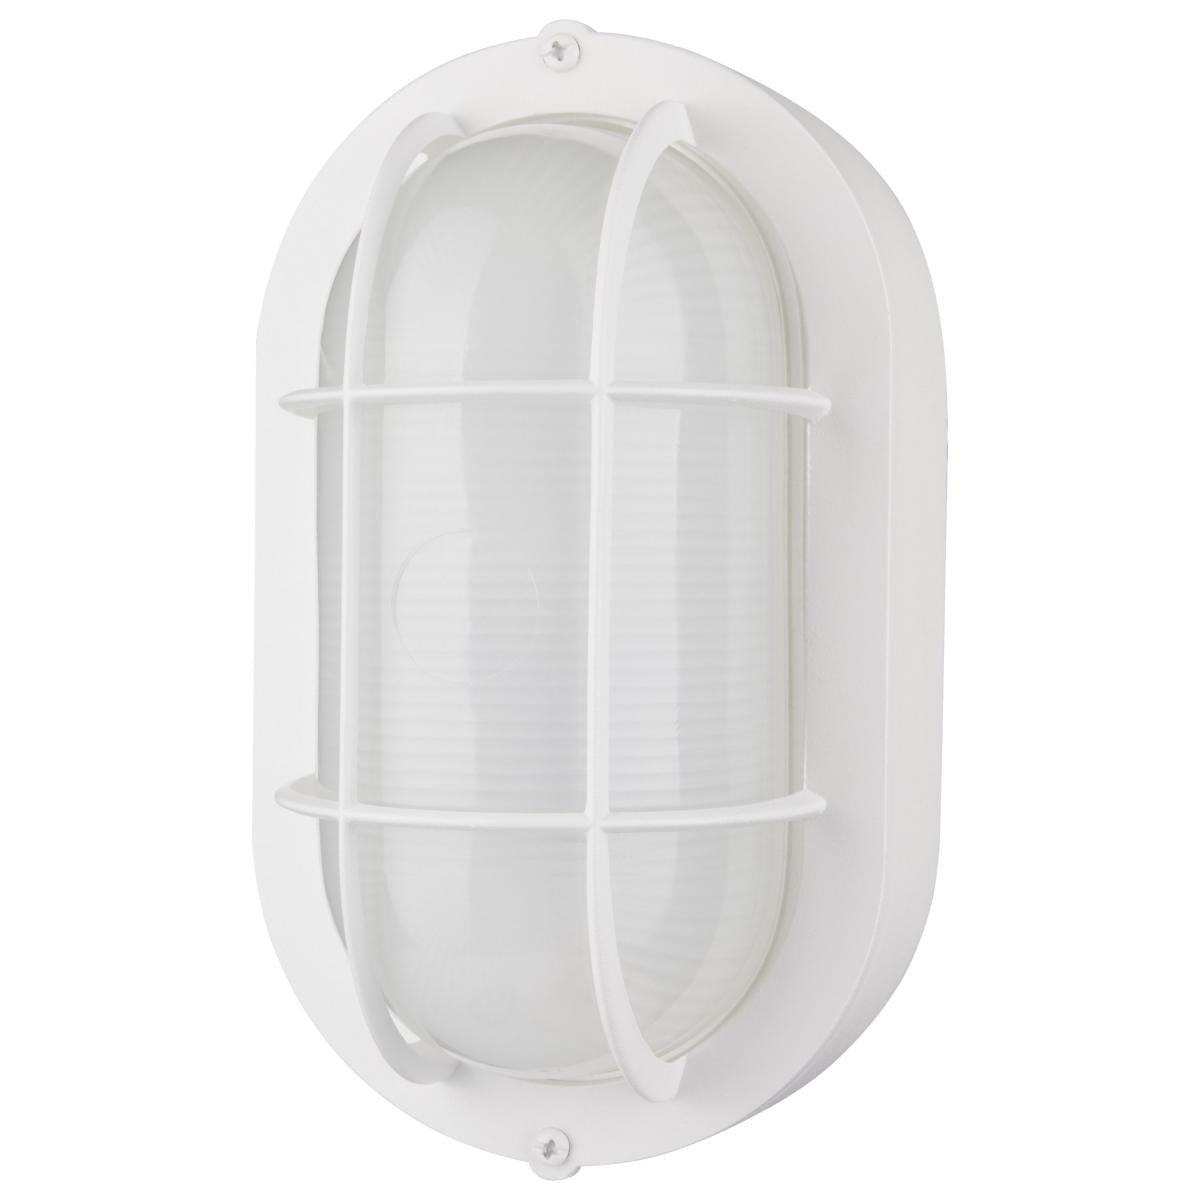 Satco 62-1388 LED Small Oval Bulk Head Fixture; White Finish with White Glass